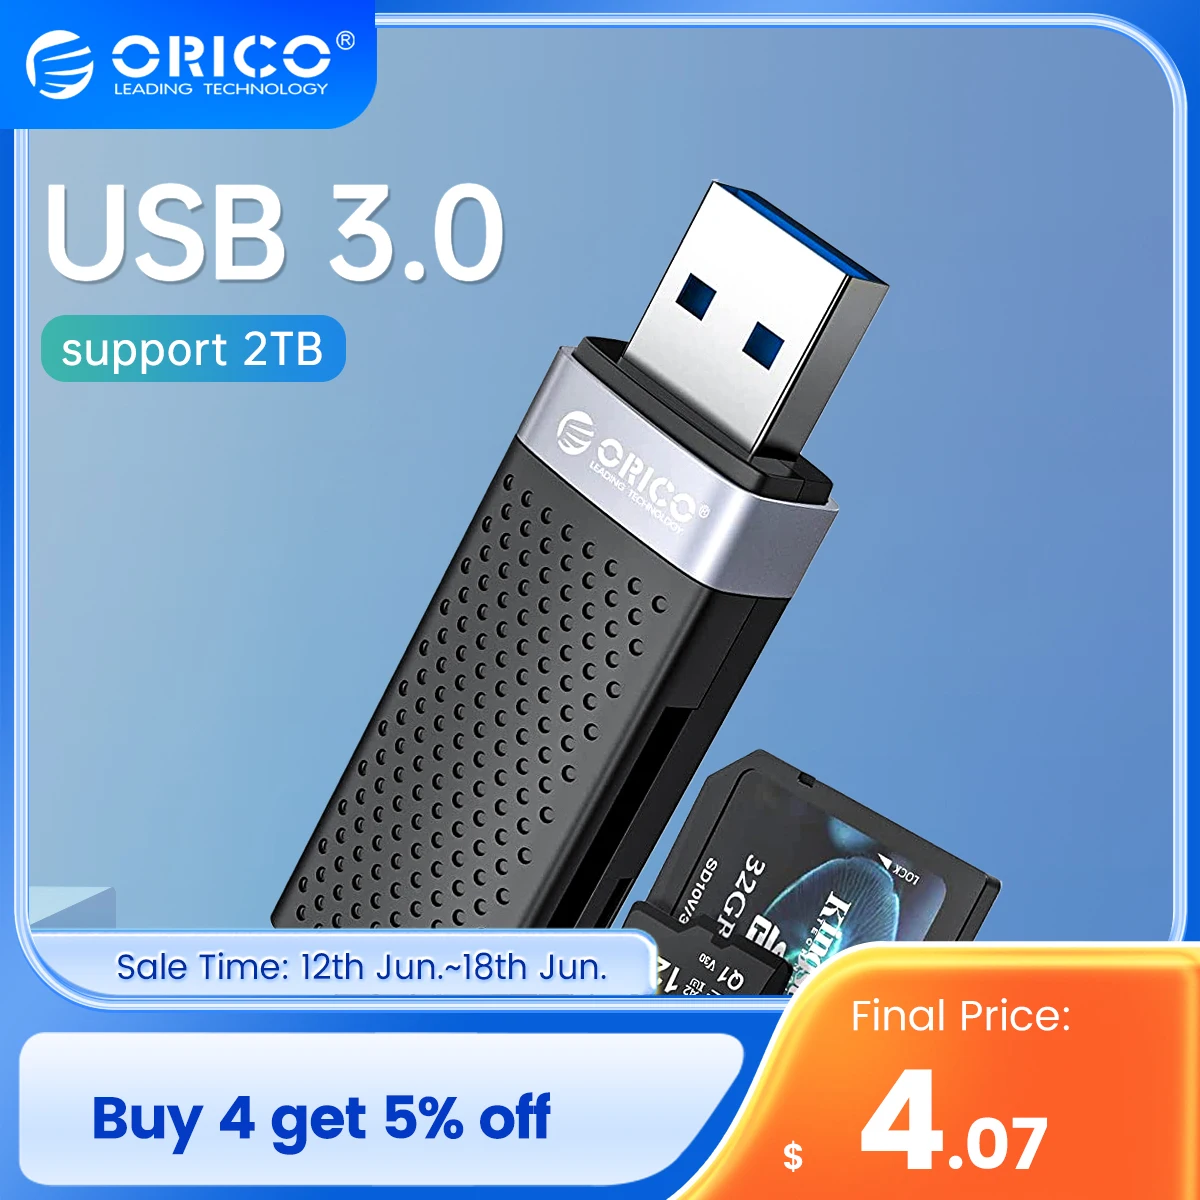 ORICO USB 3.0 Card Reader Flash Smart Memory Card 2 Slots for TF SD Micro SD Card Adapter Laptop Accessories PC Macbook Linux